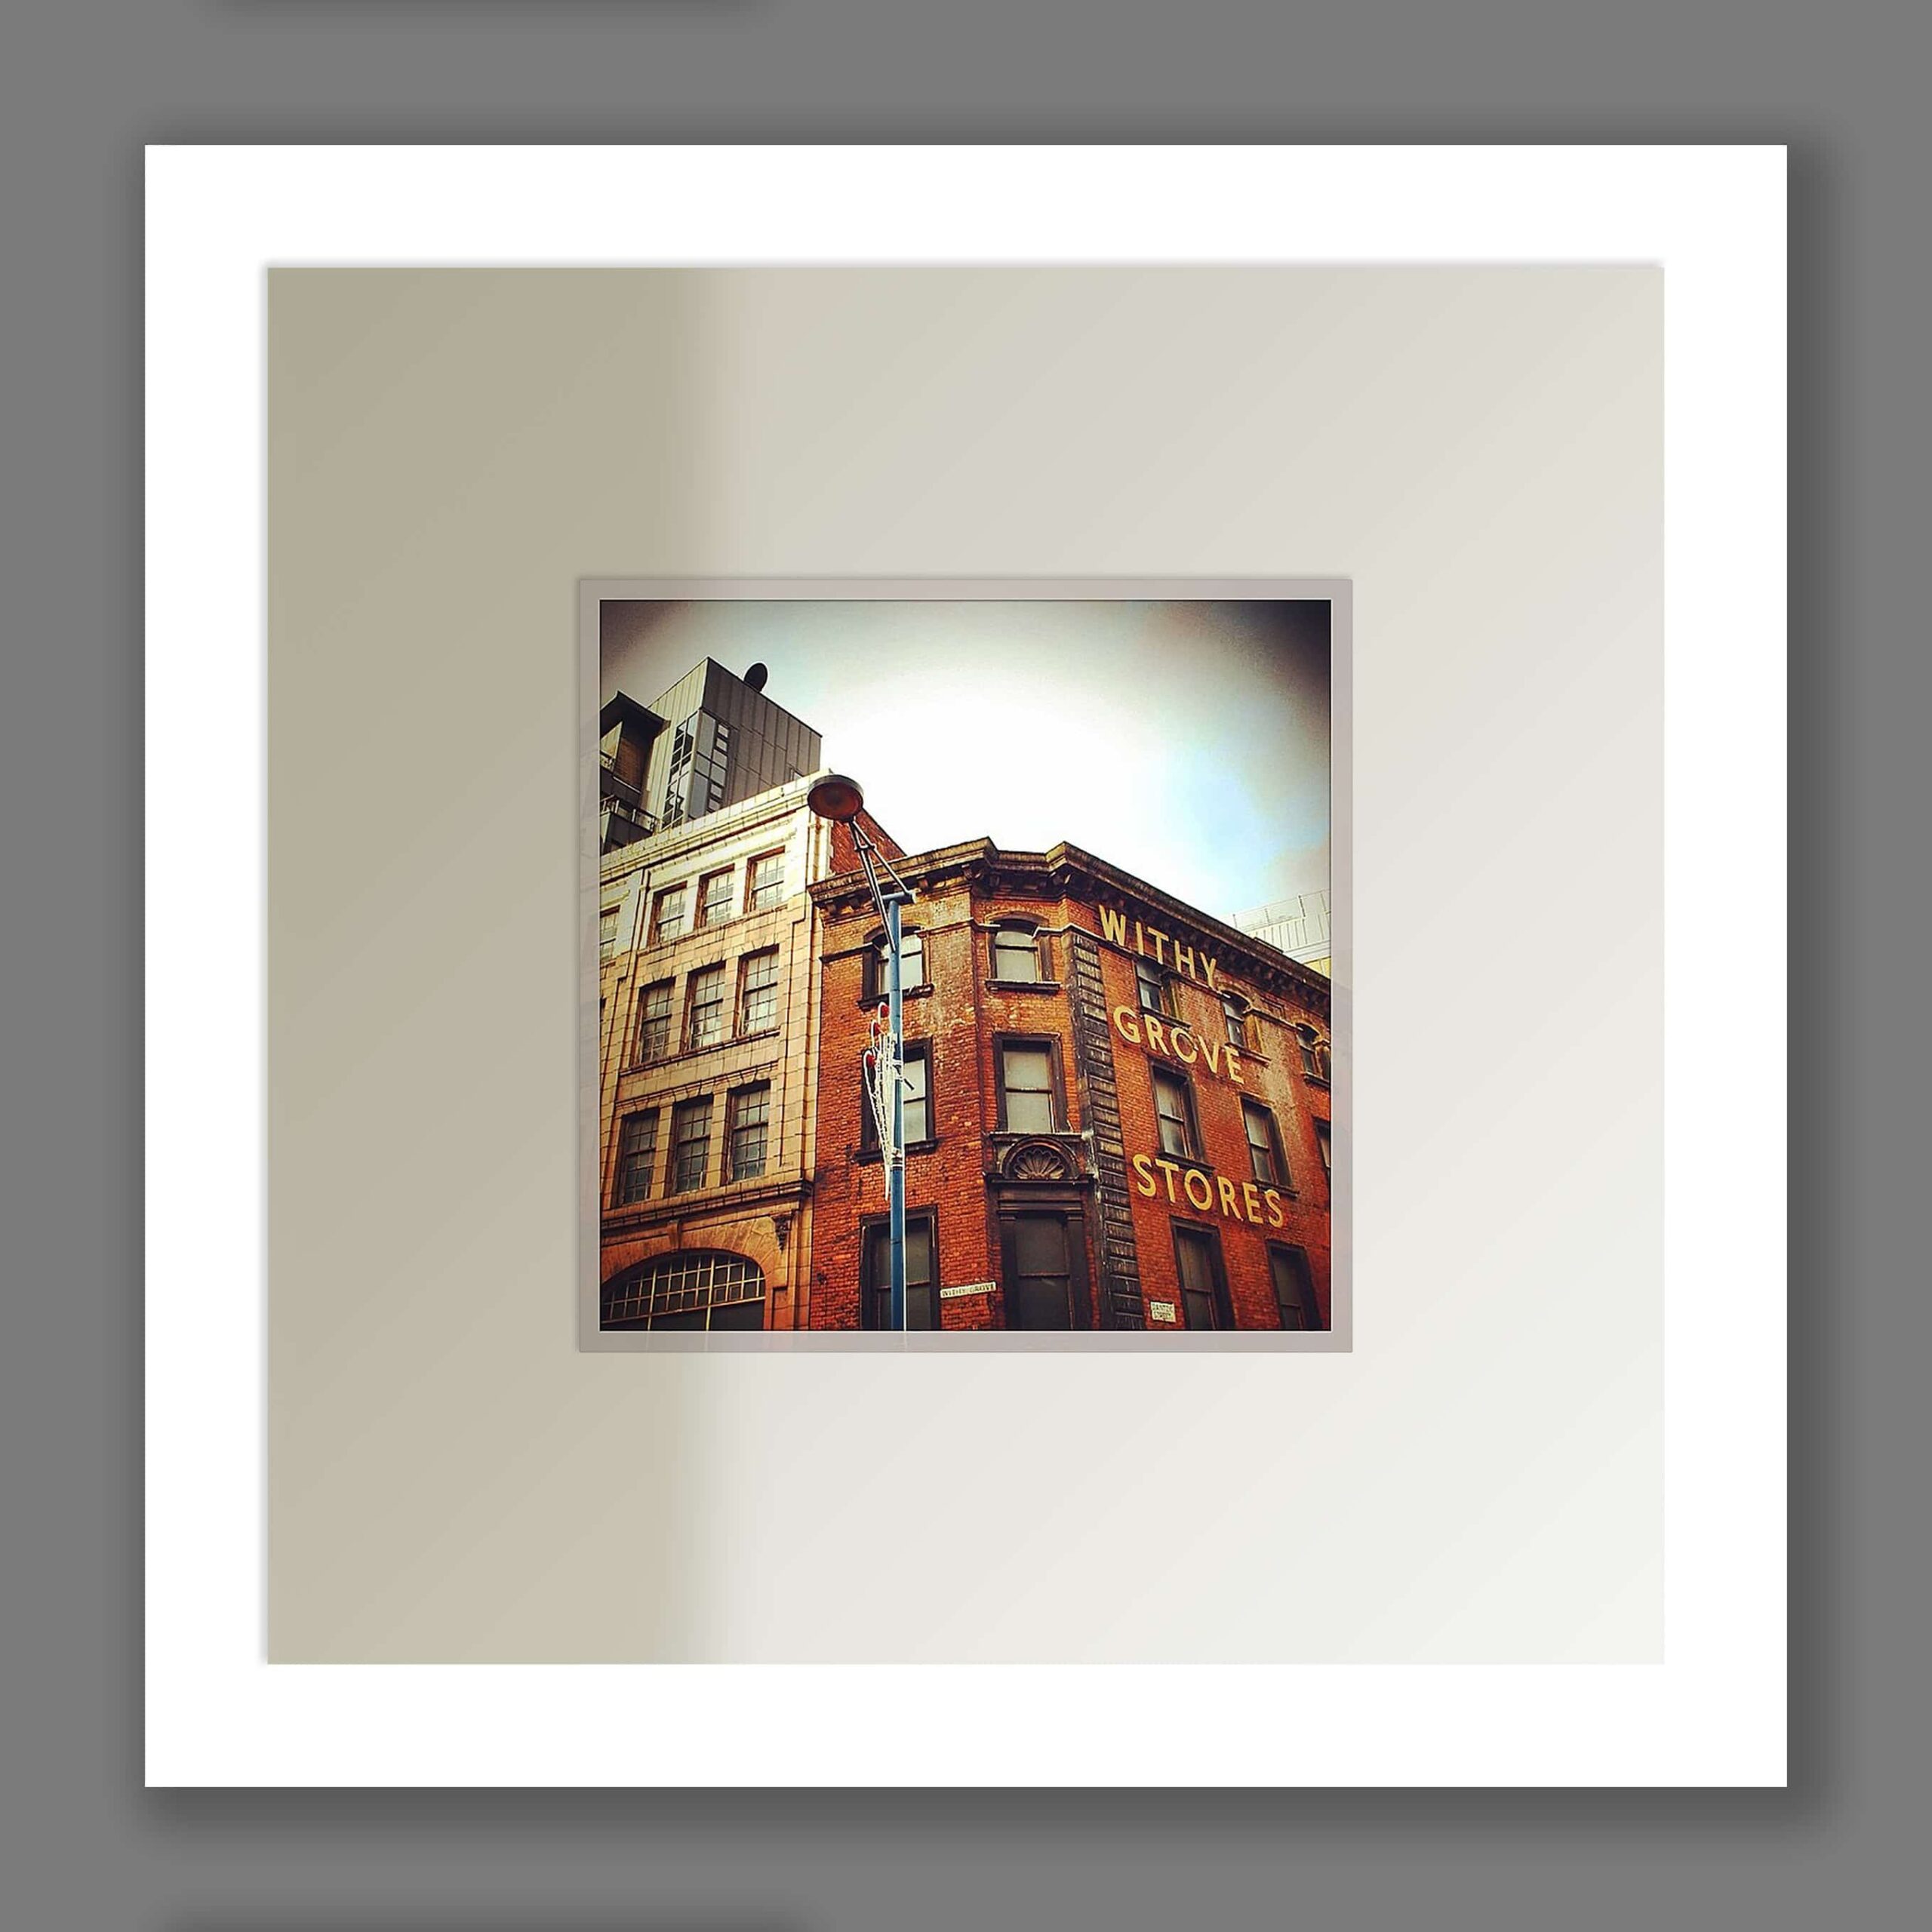 Withy Grove Stores| Micro Manchester Series Micro Manchester colour 2